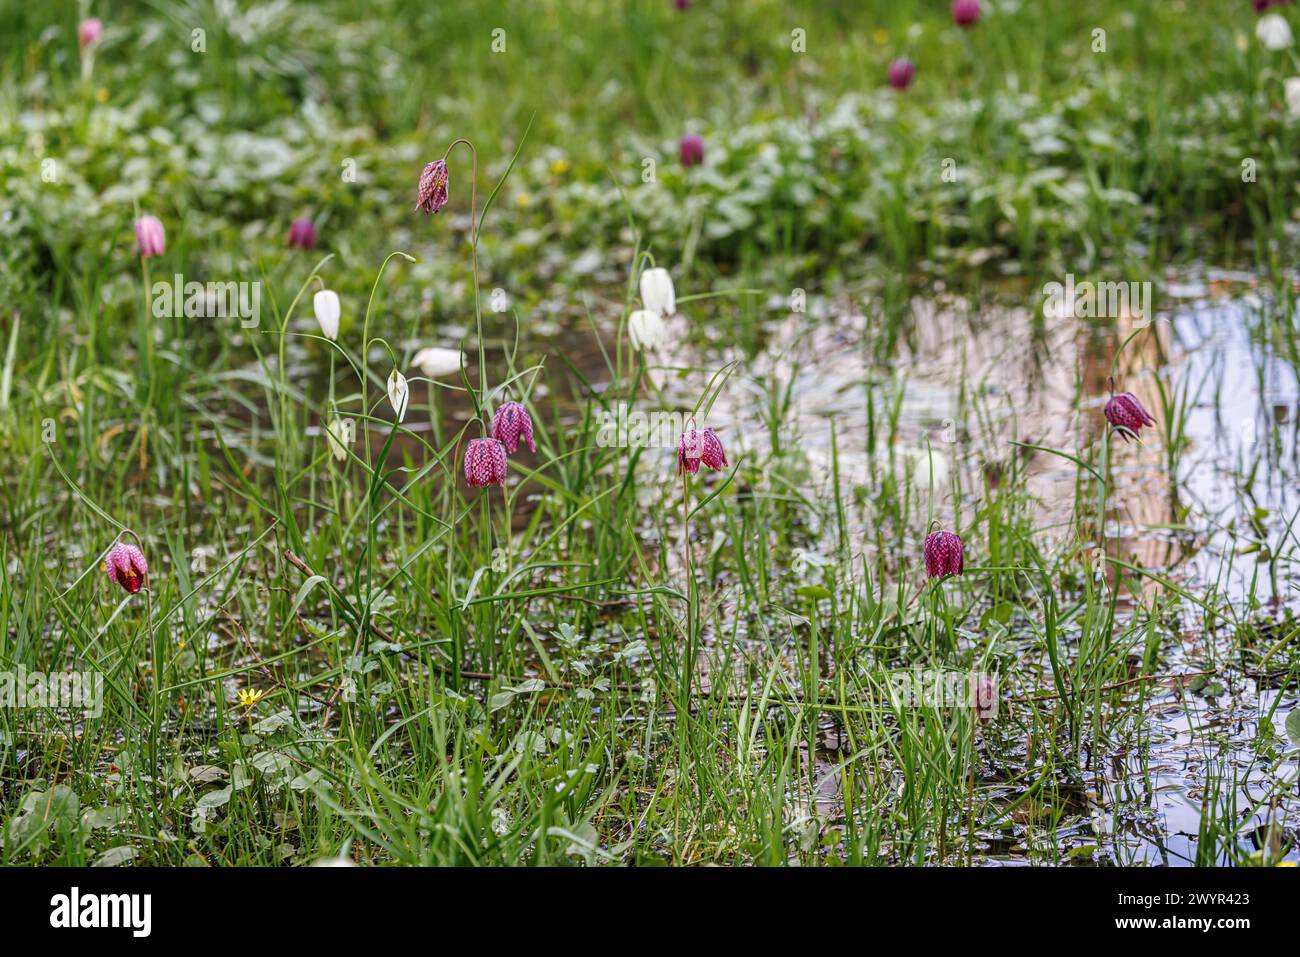 Mixed purple and white Fritillaria meleagris, snake's head lily, flowering growing in water at Vann Garden near Hambledon, Surrey in early spring Stock Photo